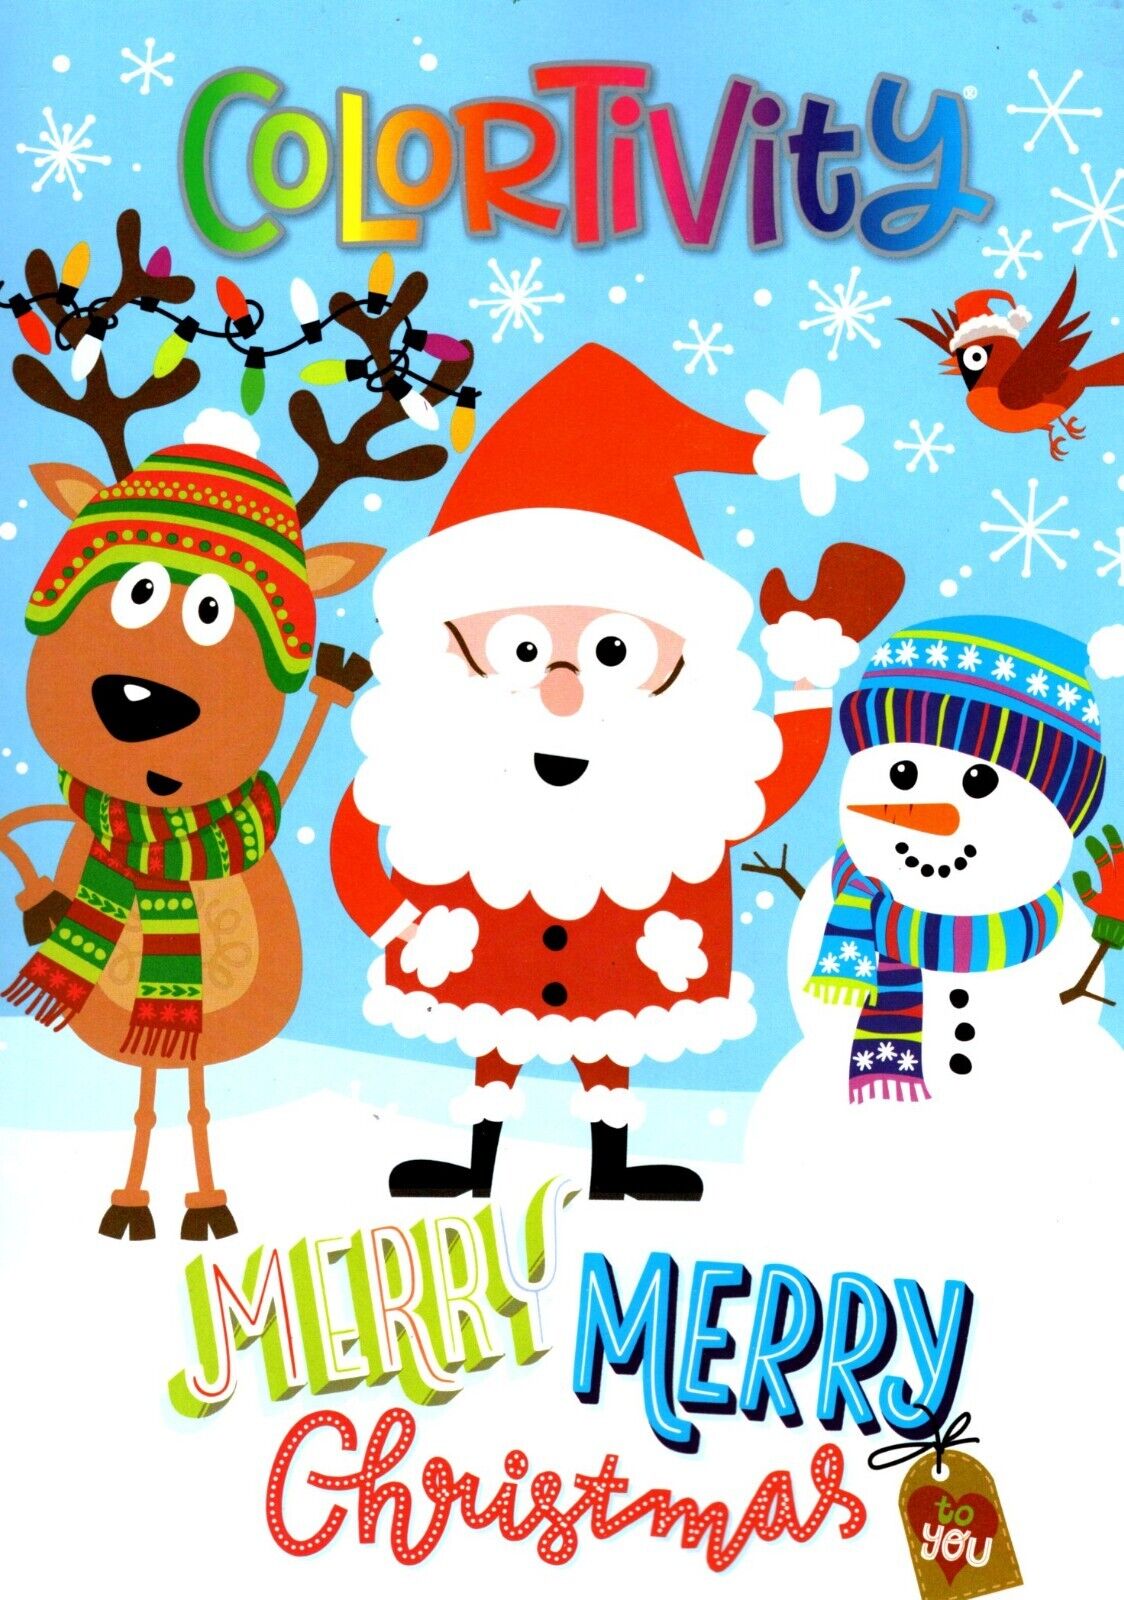 Christmas Holiday - Coloring and Activity Book ~ Merry, Merry Christmas